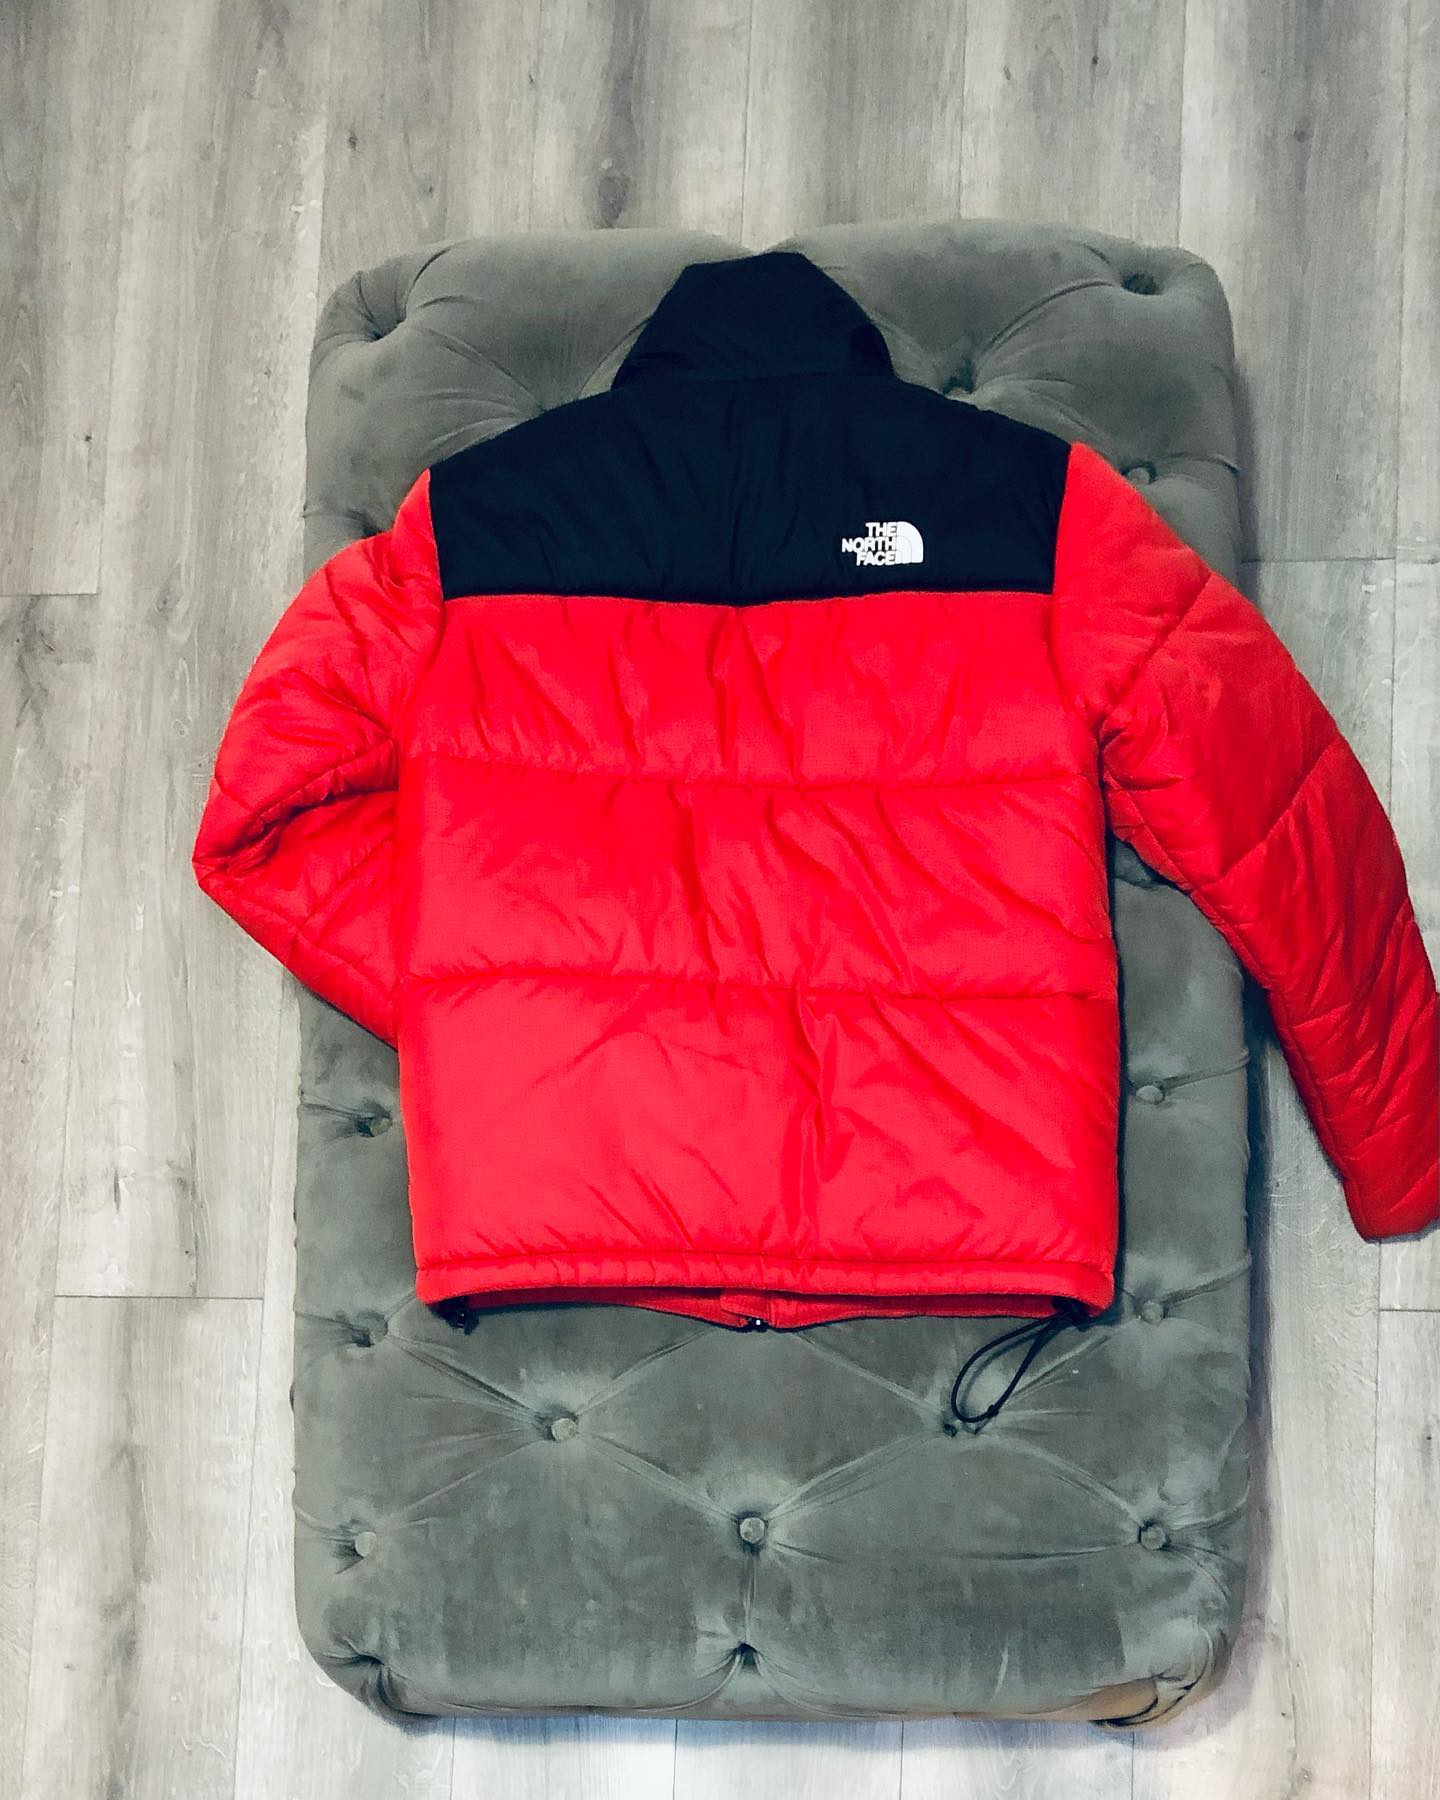 RED NORTH FACE JACKET
❌